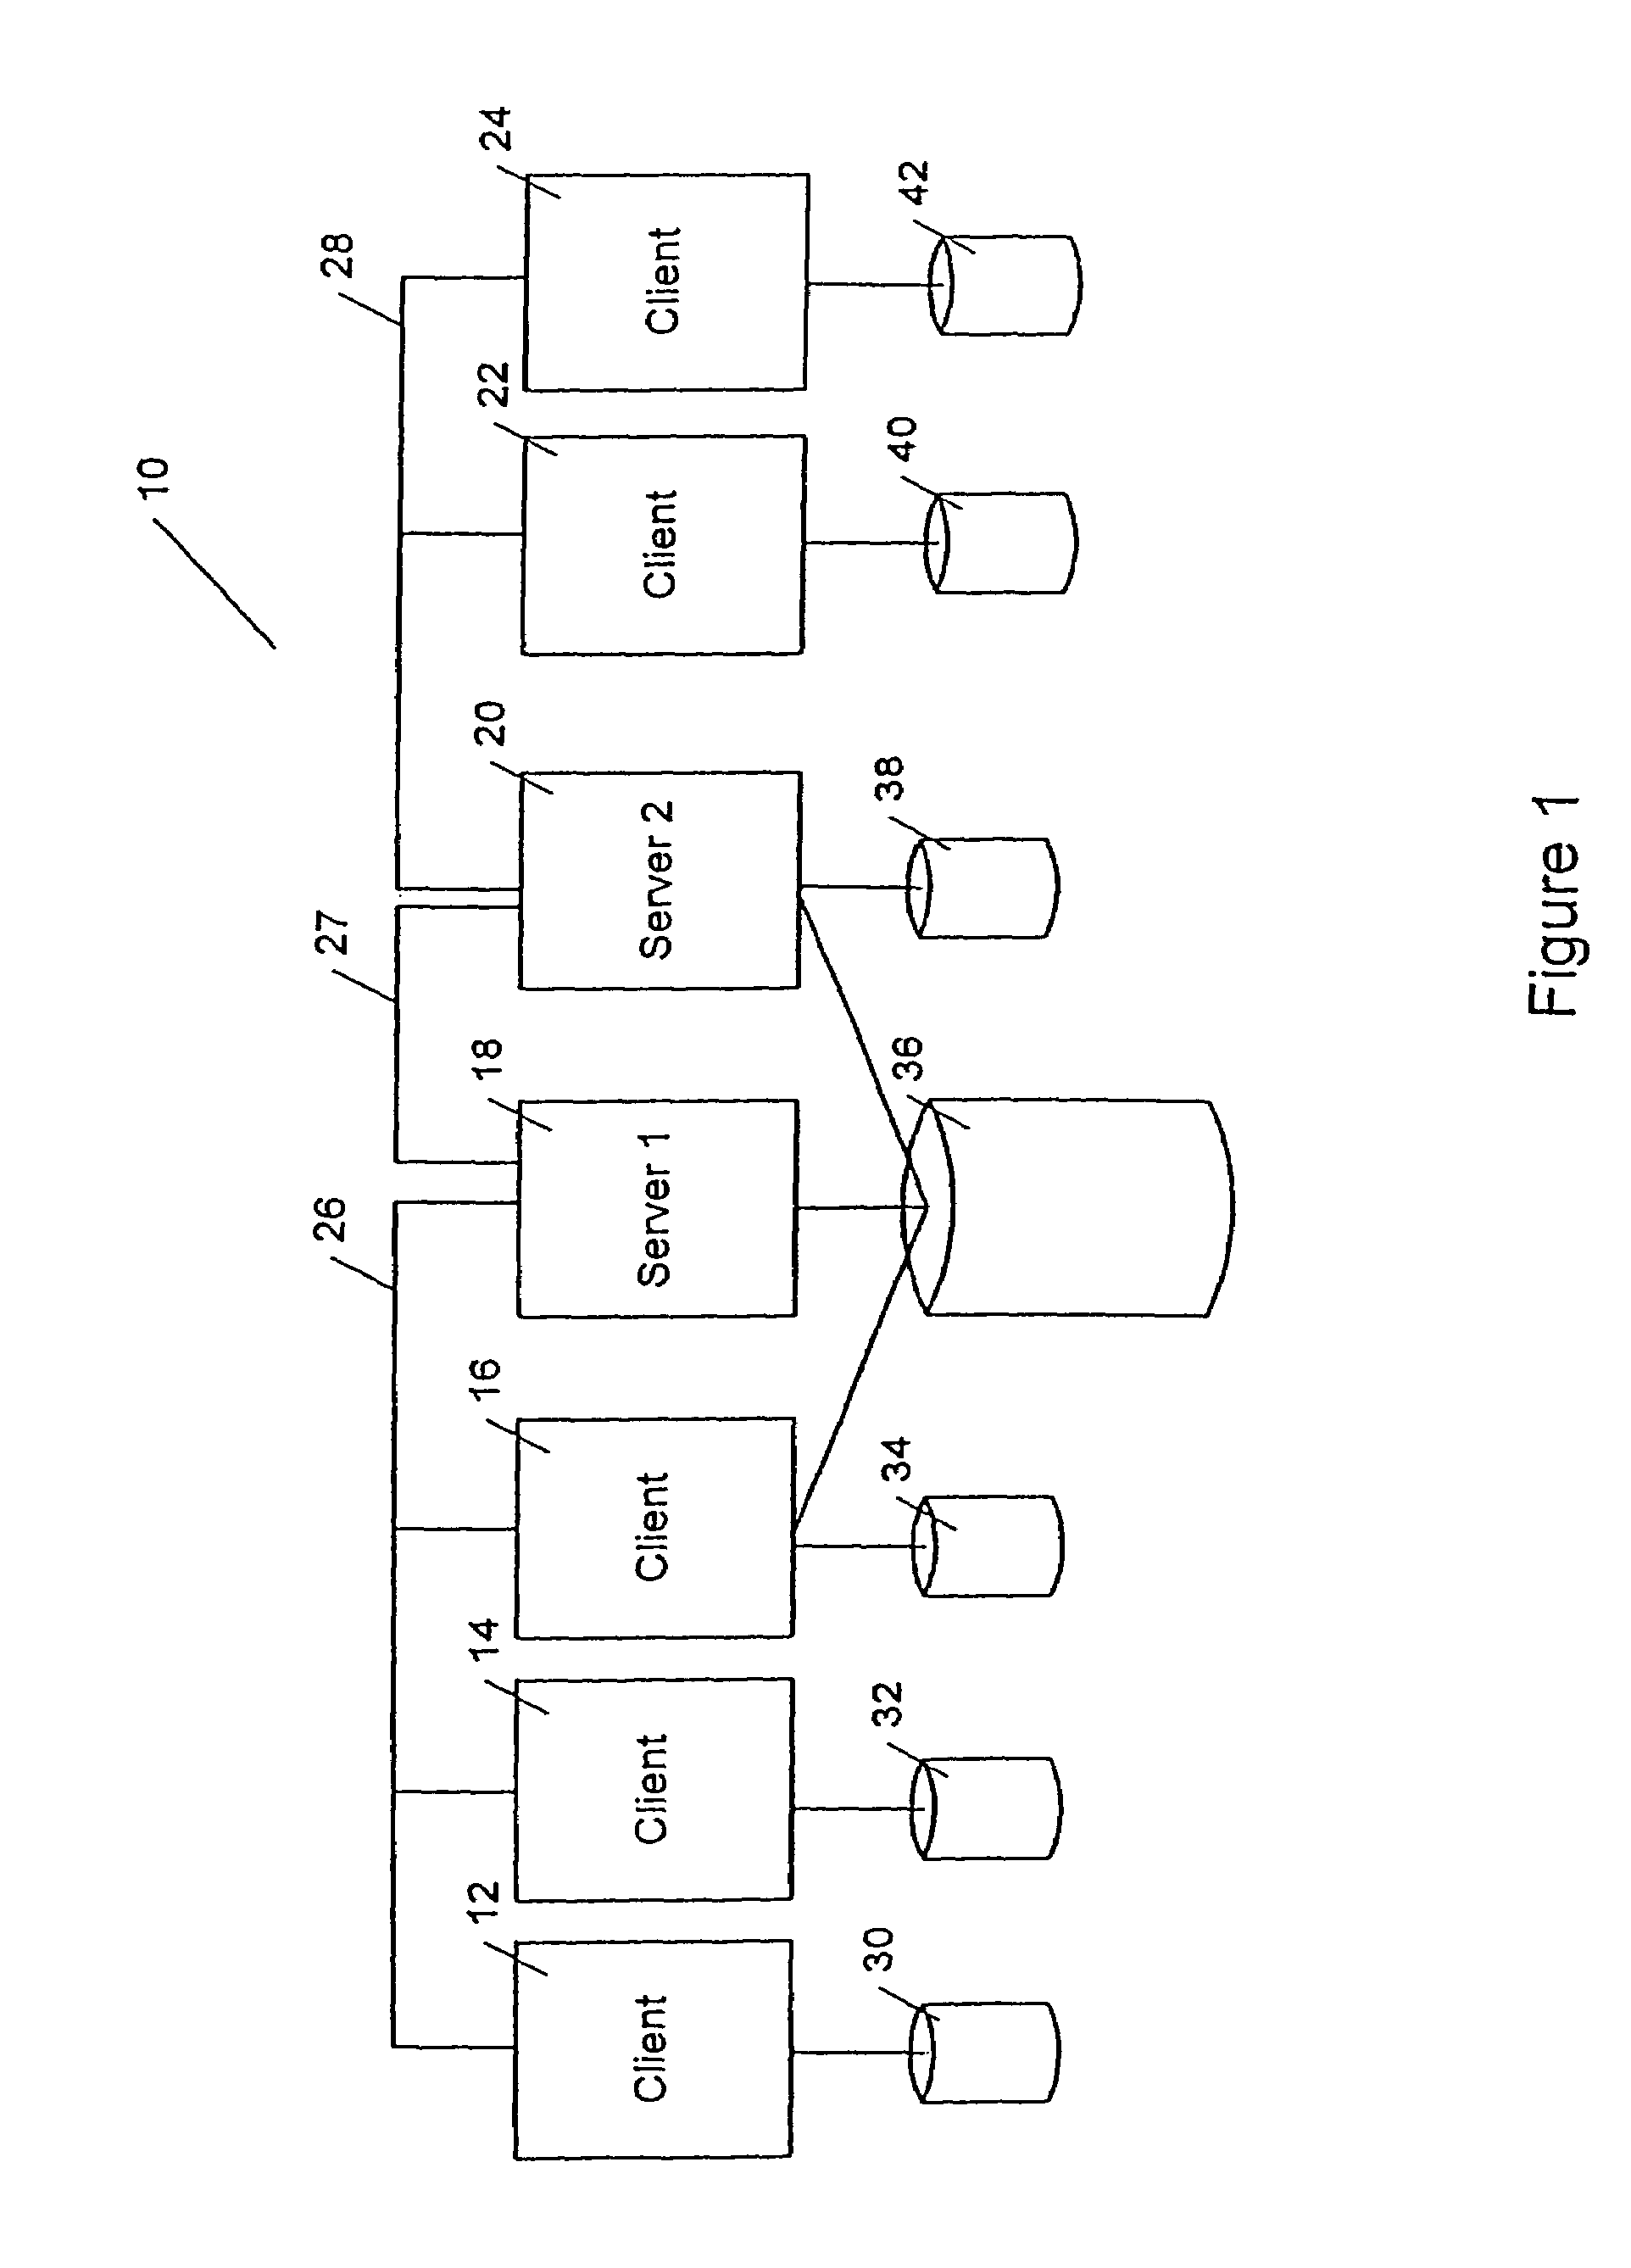 Methods and apparatus for high-speed access to and sharing of storage devices on a networked digital data processing system